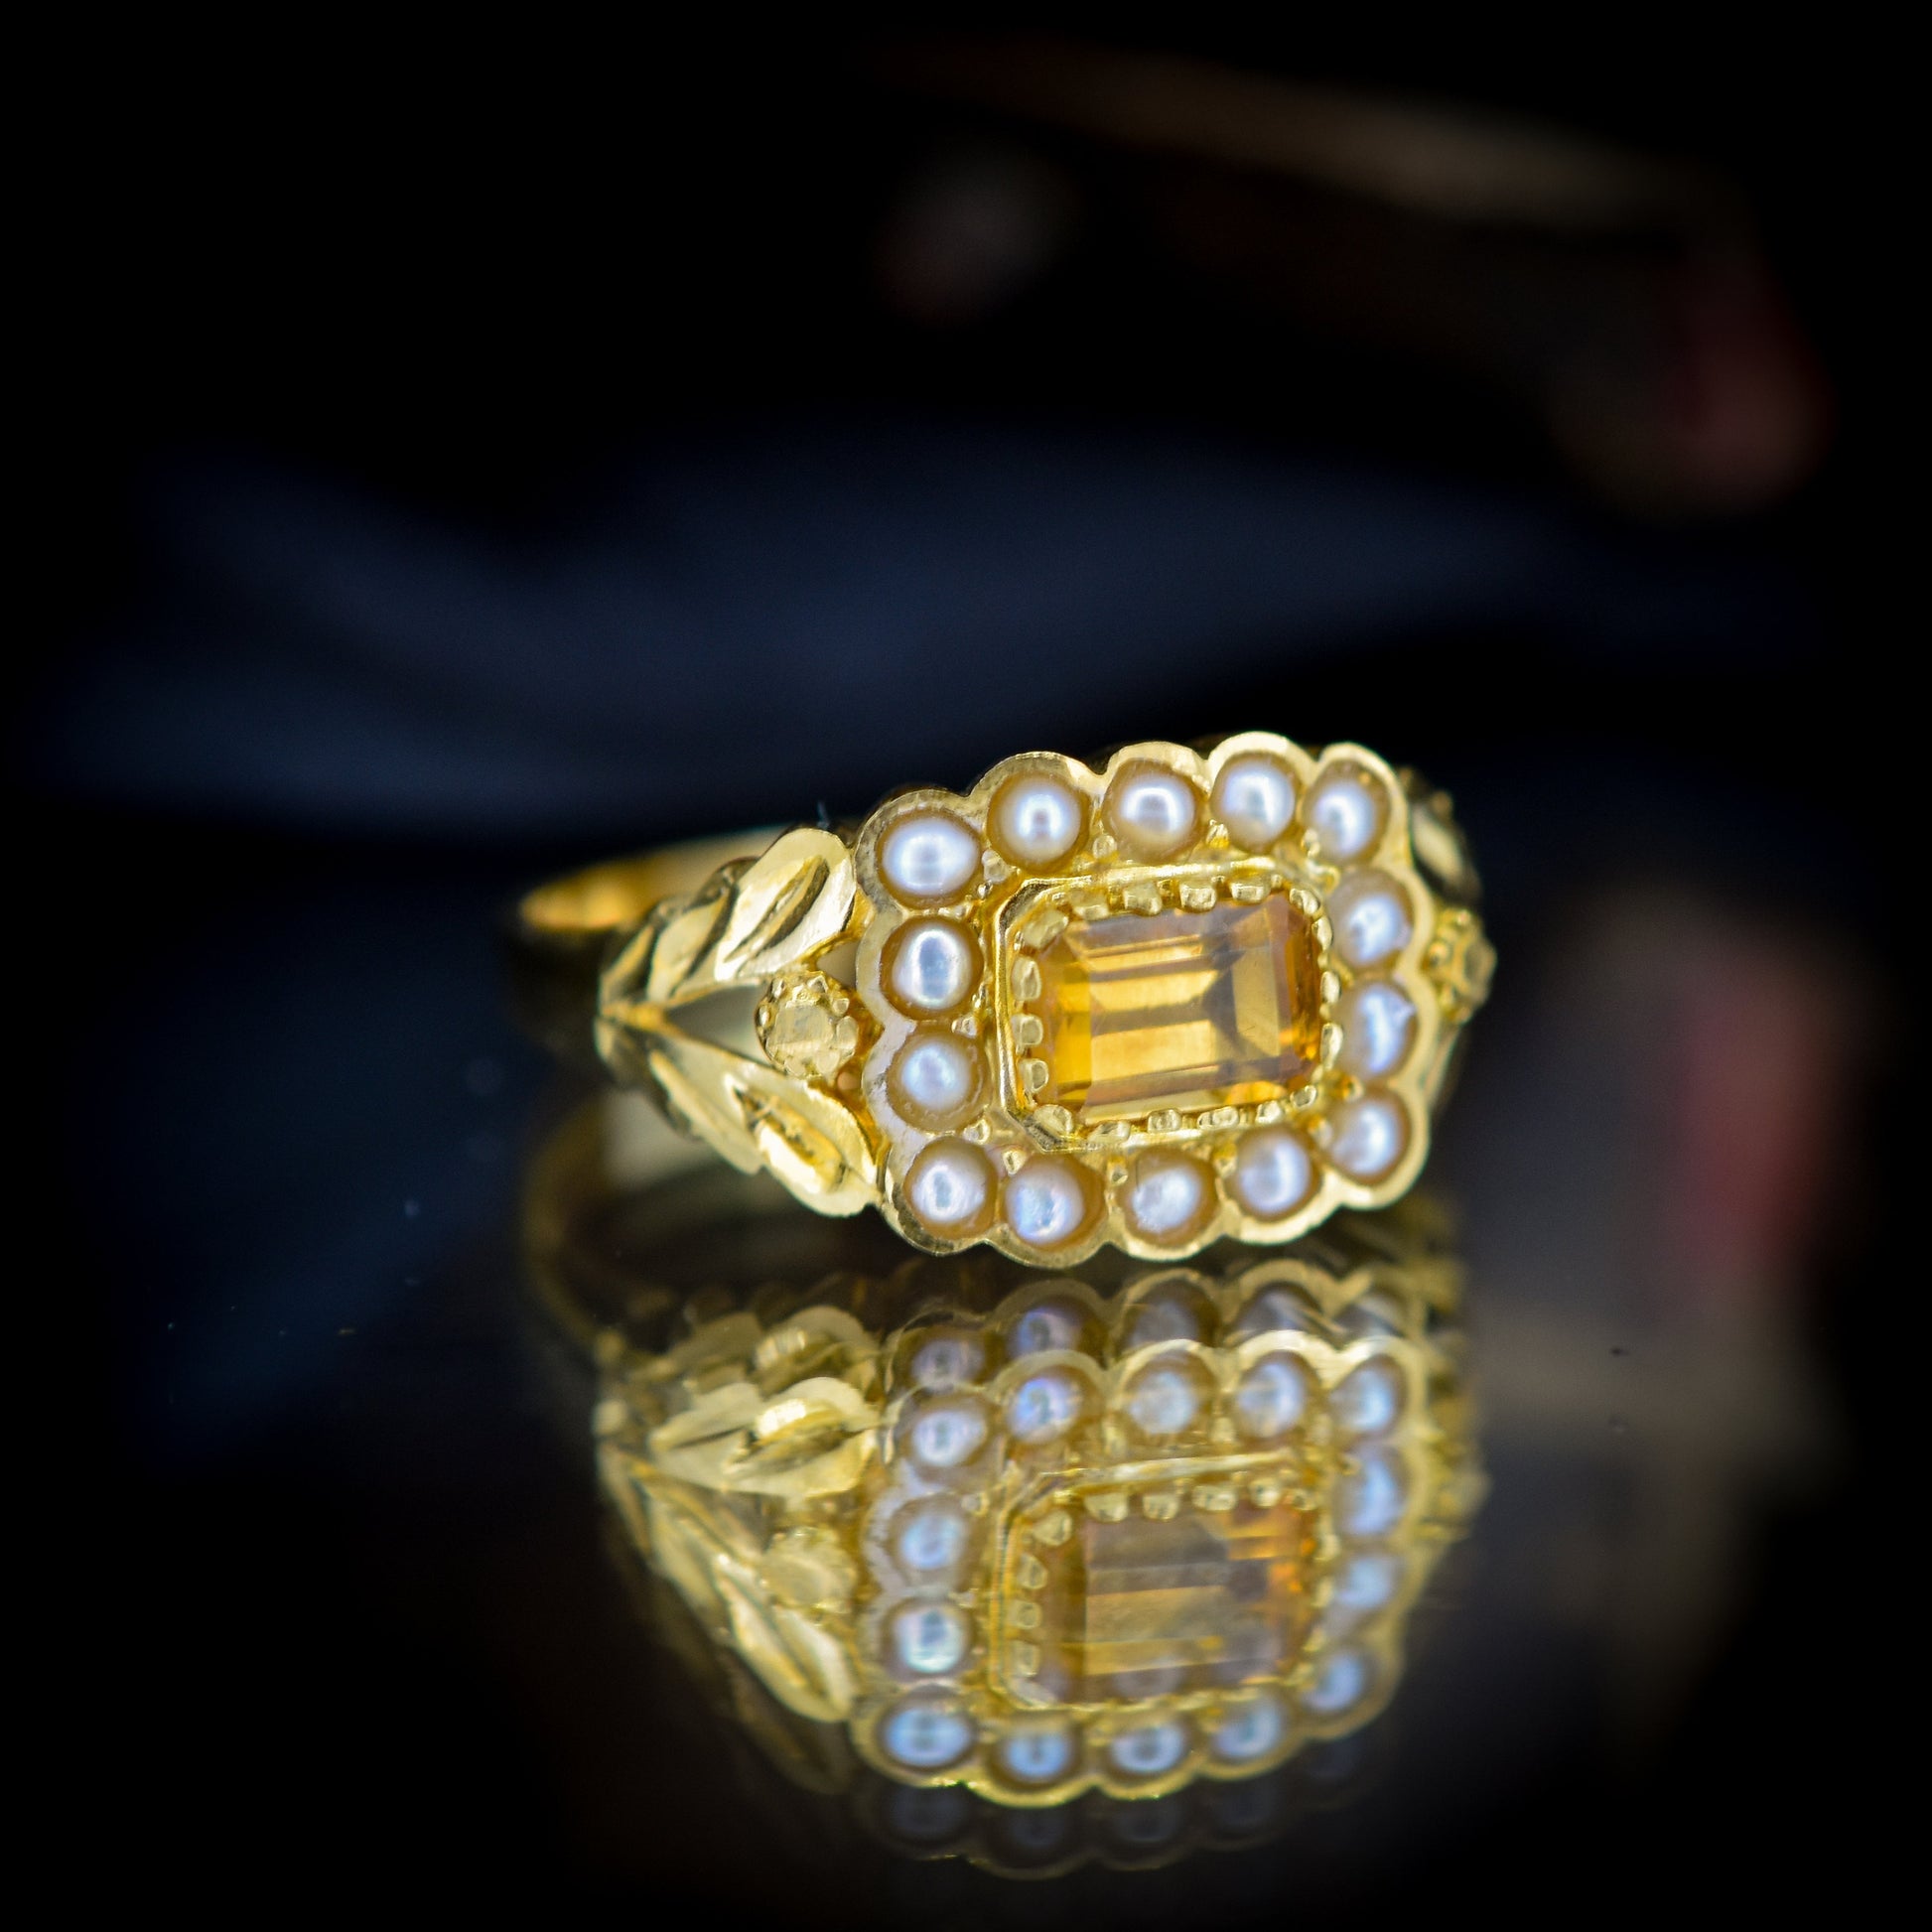 Citrine and Pearl Yellow Gold Gilded Ring | Antique Georgian Style